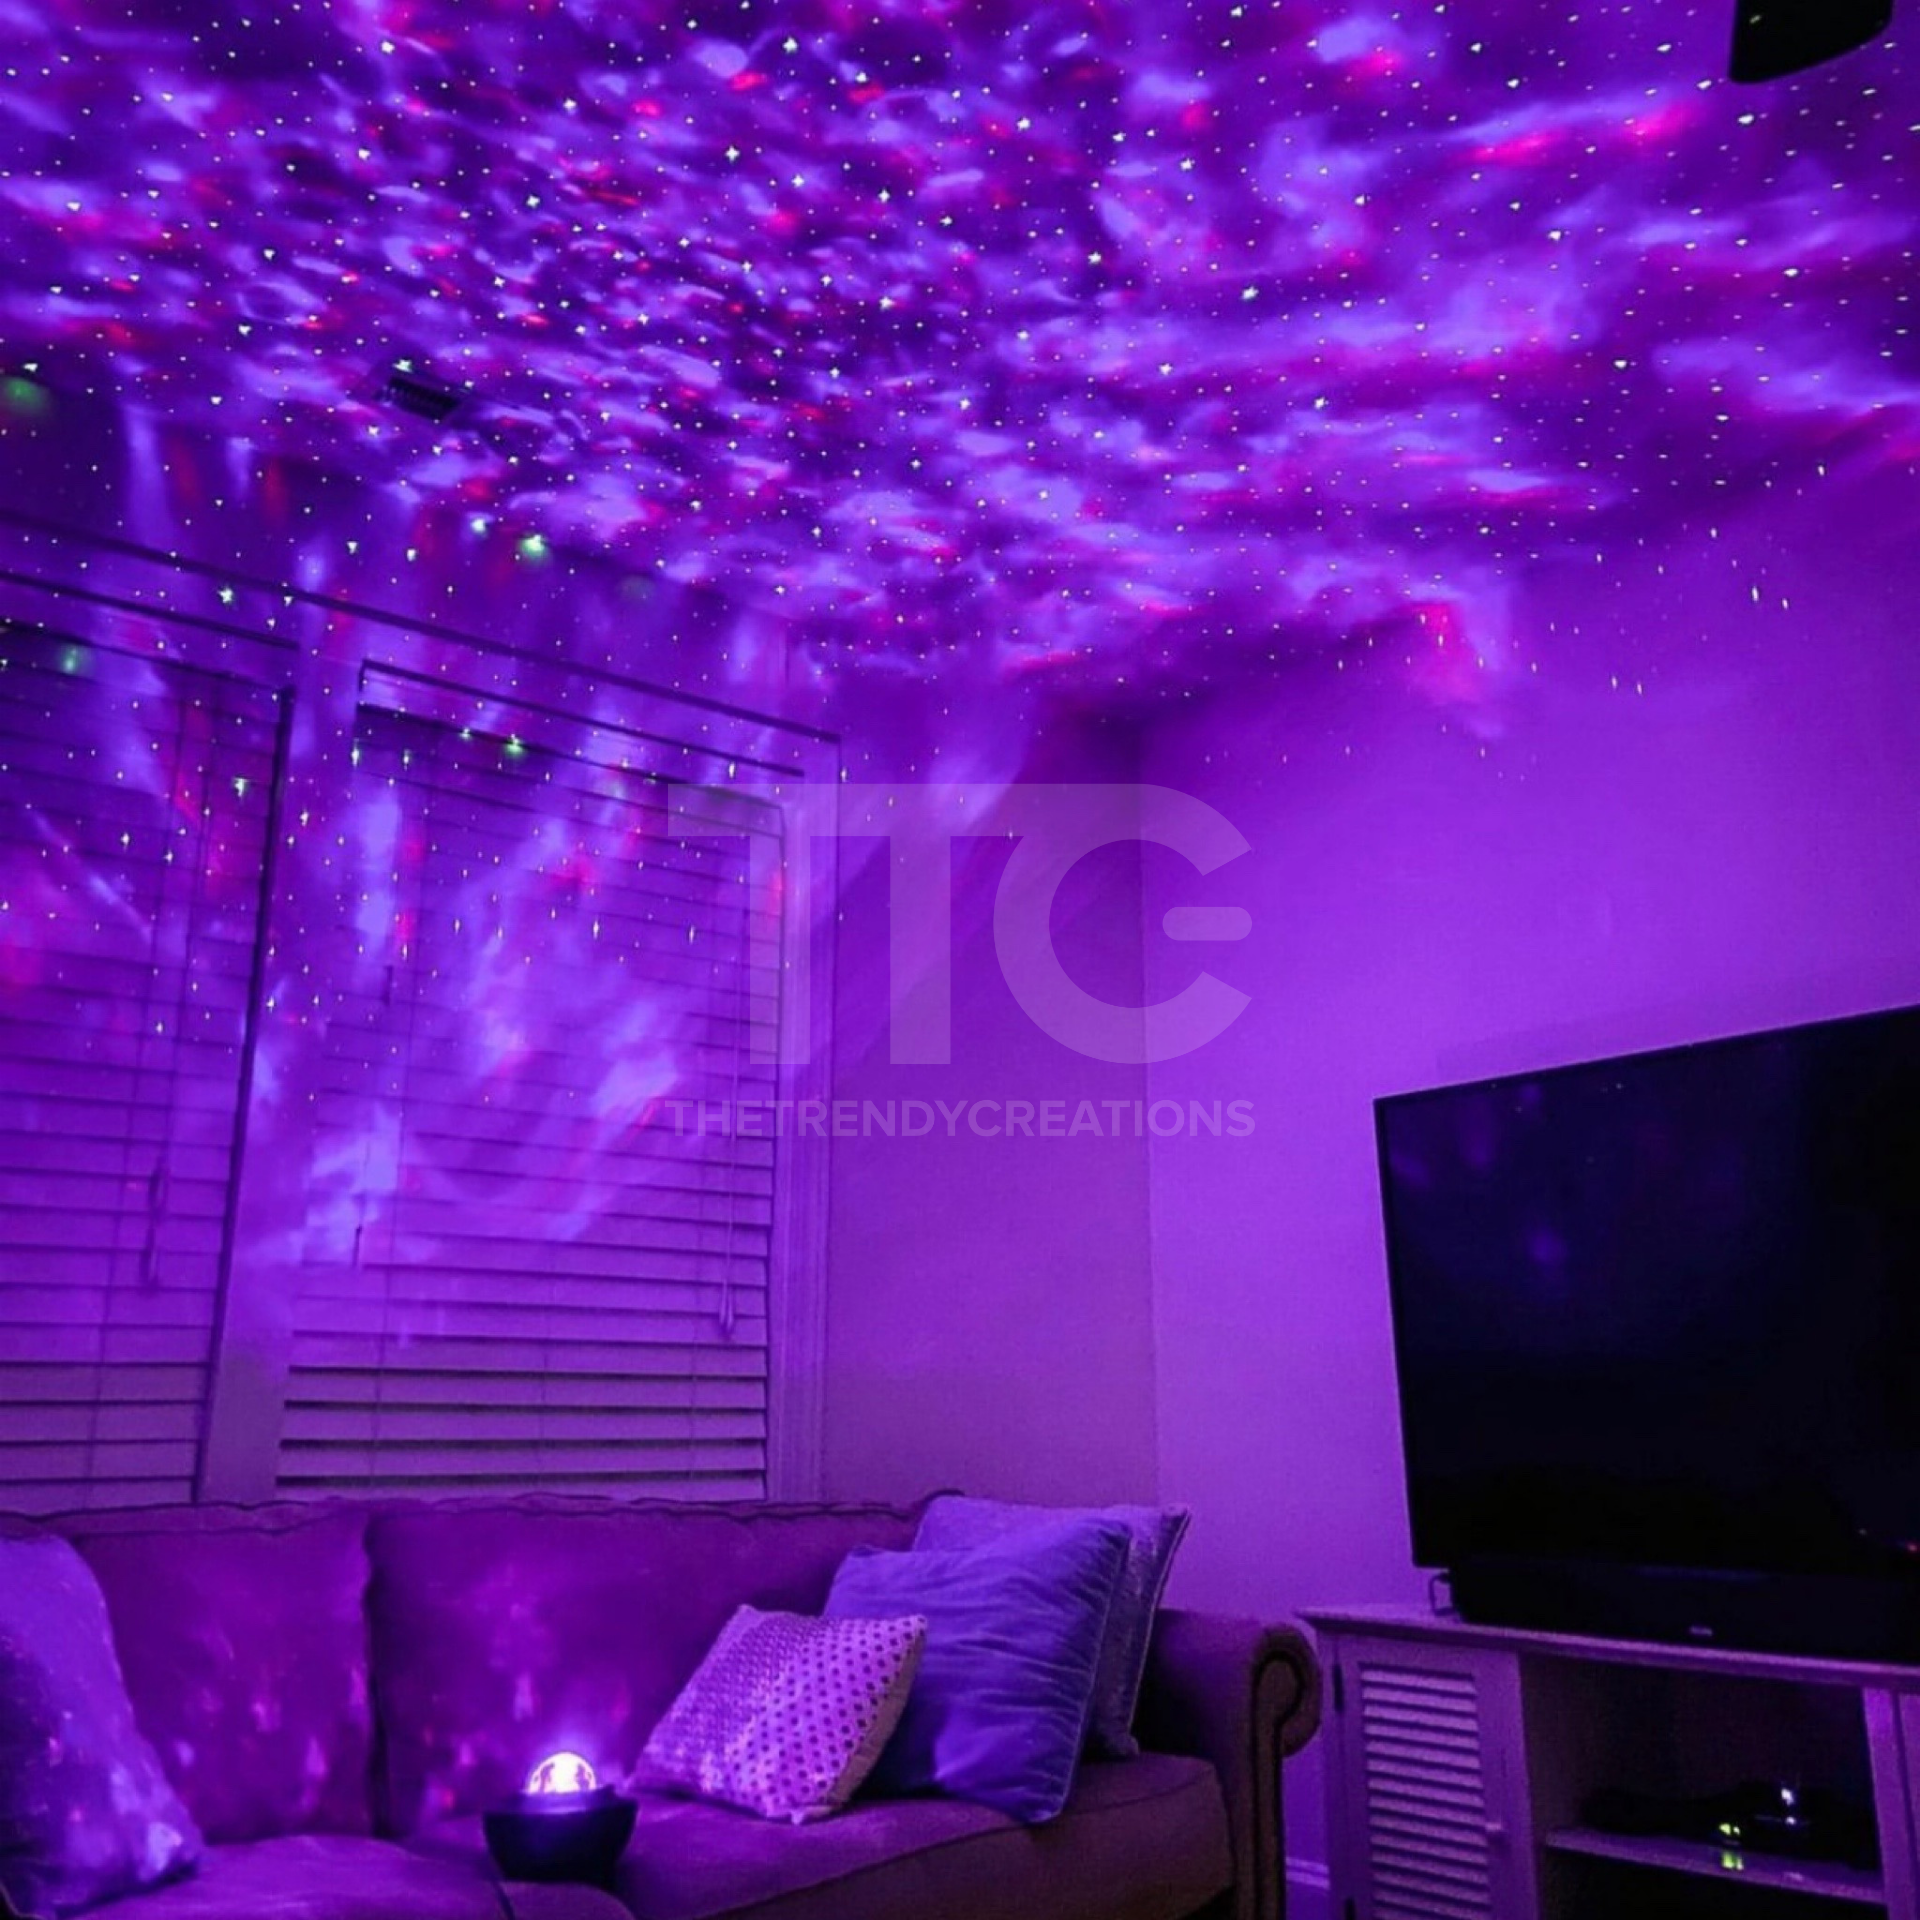 Galaxy Projector By The Trendy Creations In Pakistan